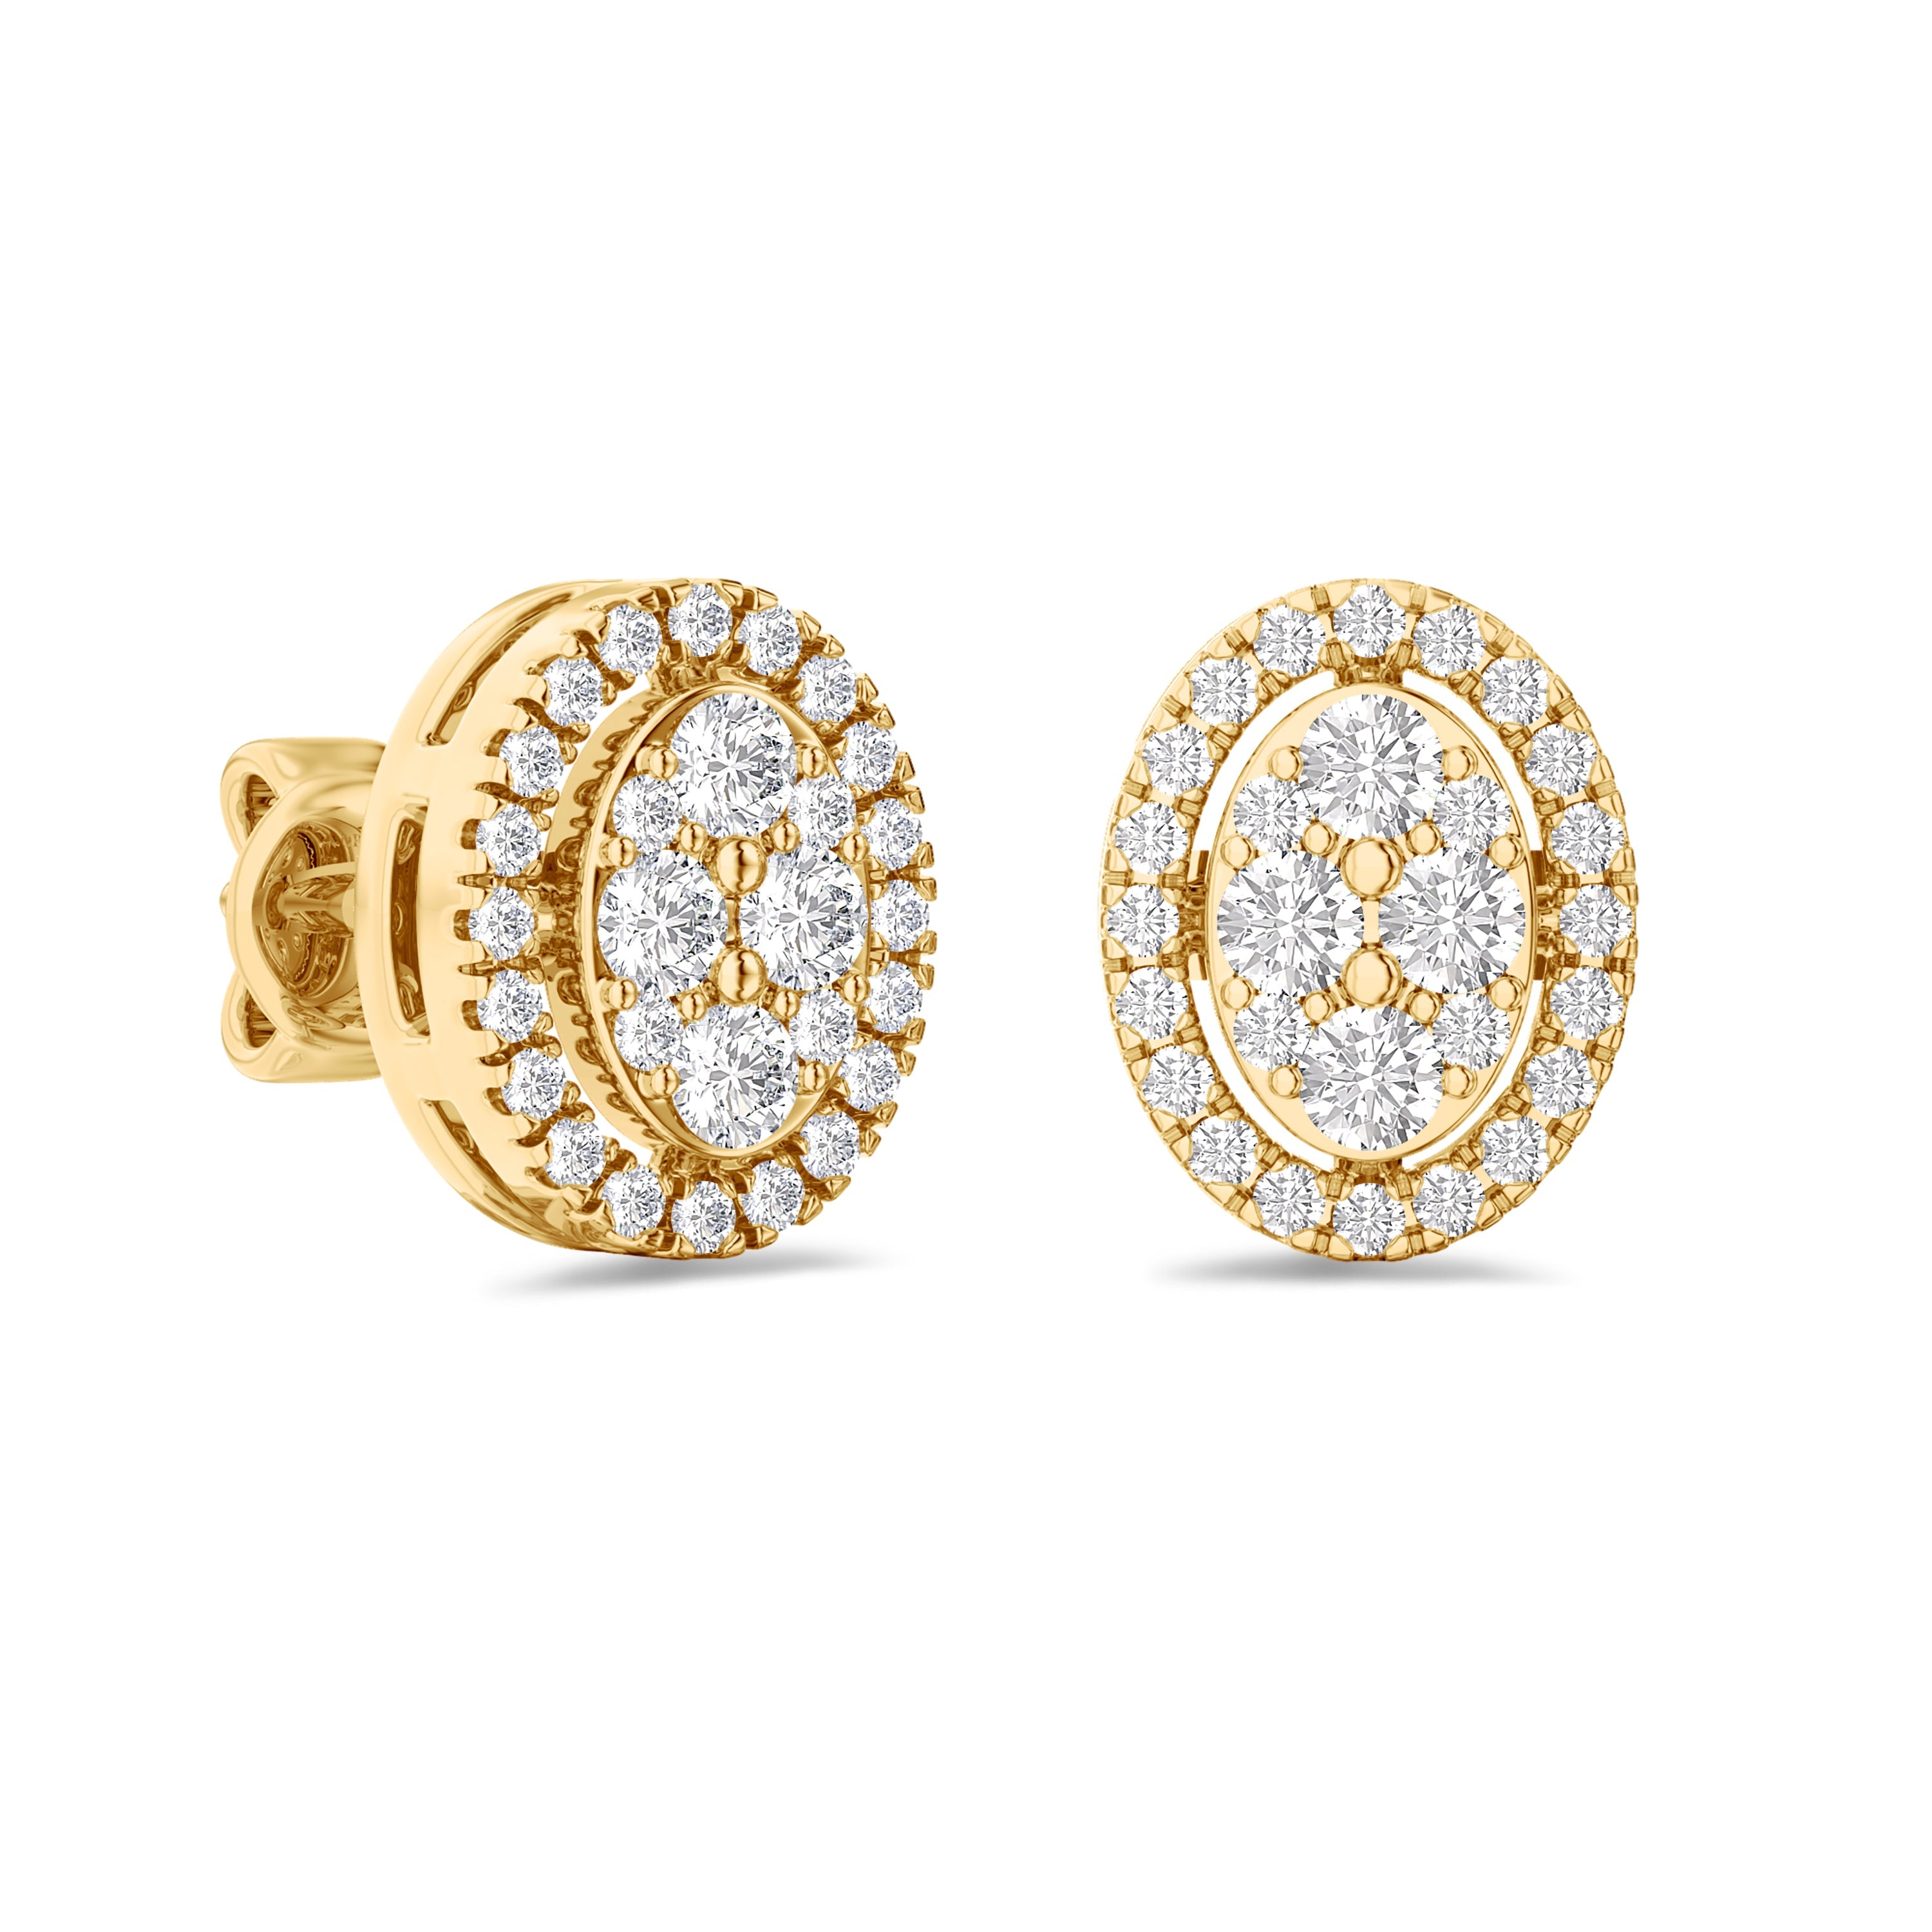 cluster diamond earrings in 18K yellow gold, 0.31 carat, FG color and VS-SI clarity